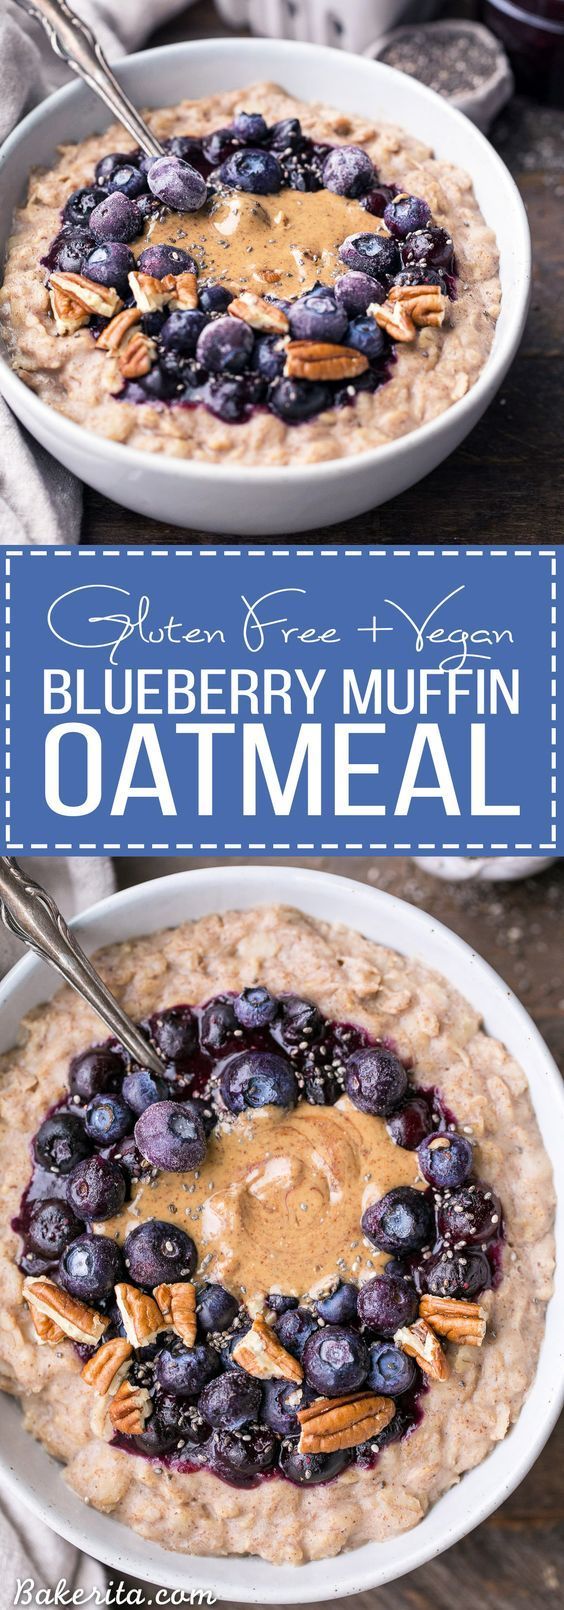 This simple Blueberry Muffin Oatmeal is sweetened with a banana, spiced with cinnamon and topped with an easy blueberry compote! Top with all your favorite toppings for a delicious, healthy + filling breakfast that is far from boring. -   19 gluten free oatmeal
 ideas